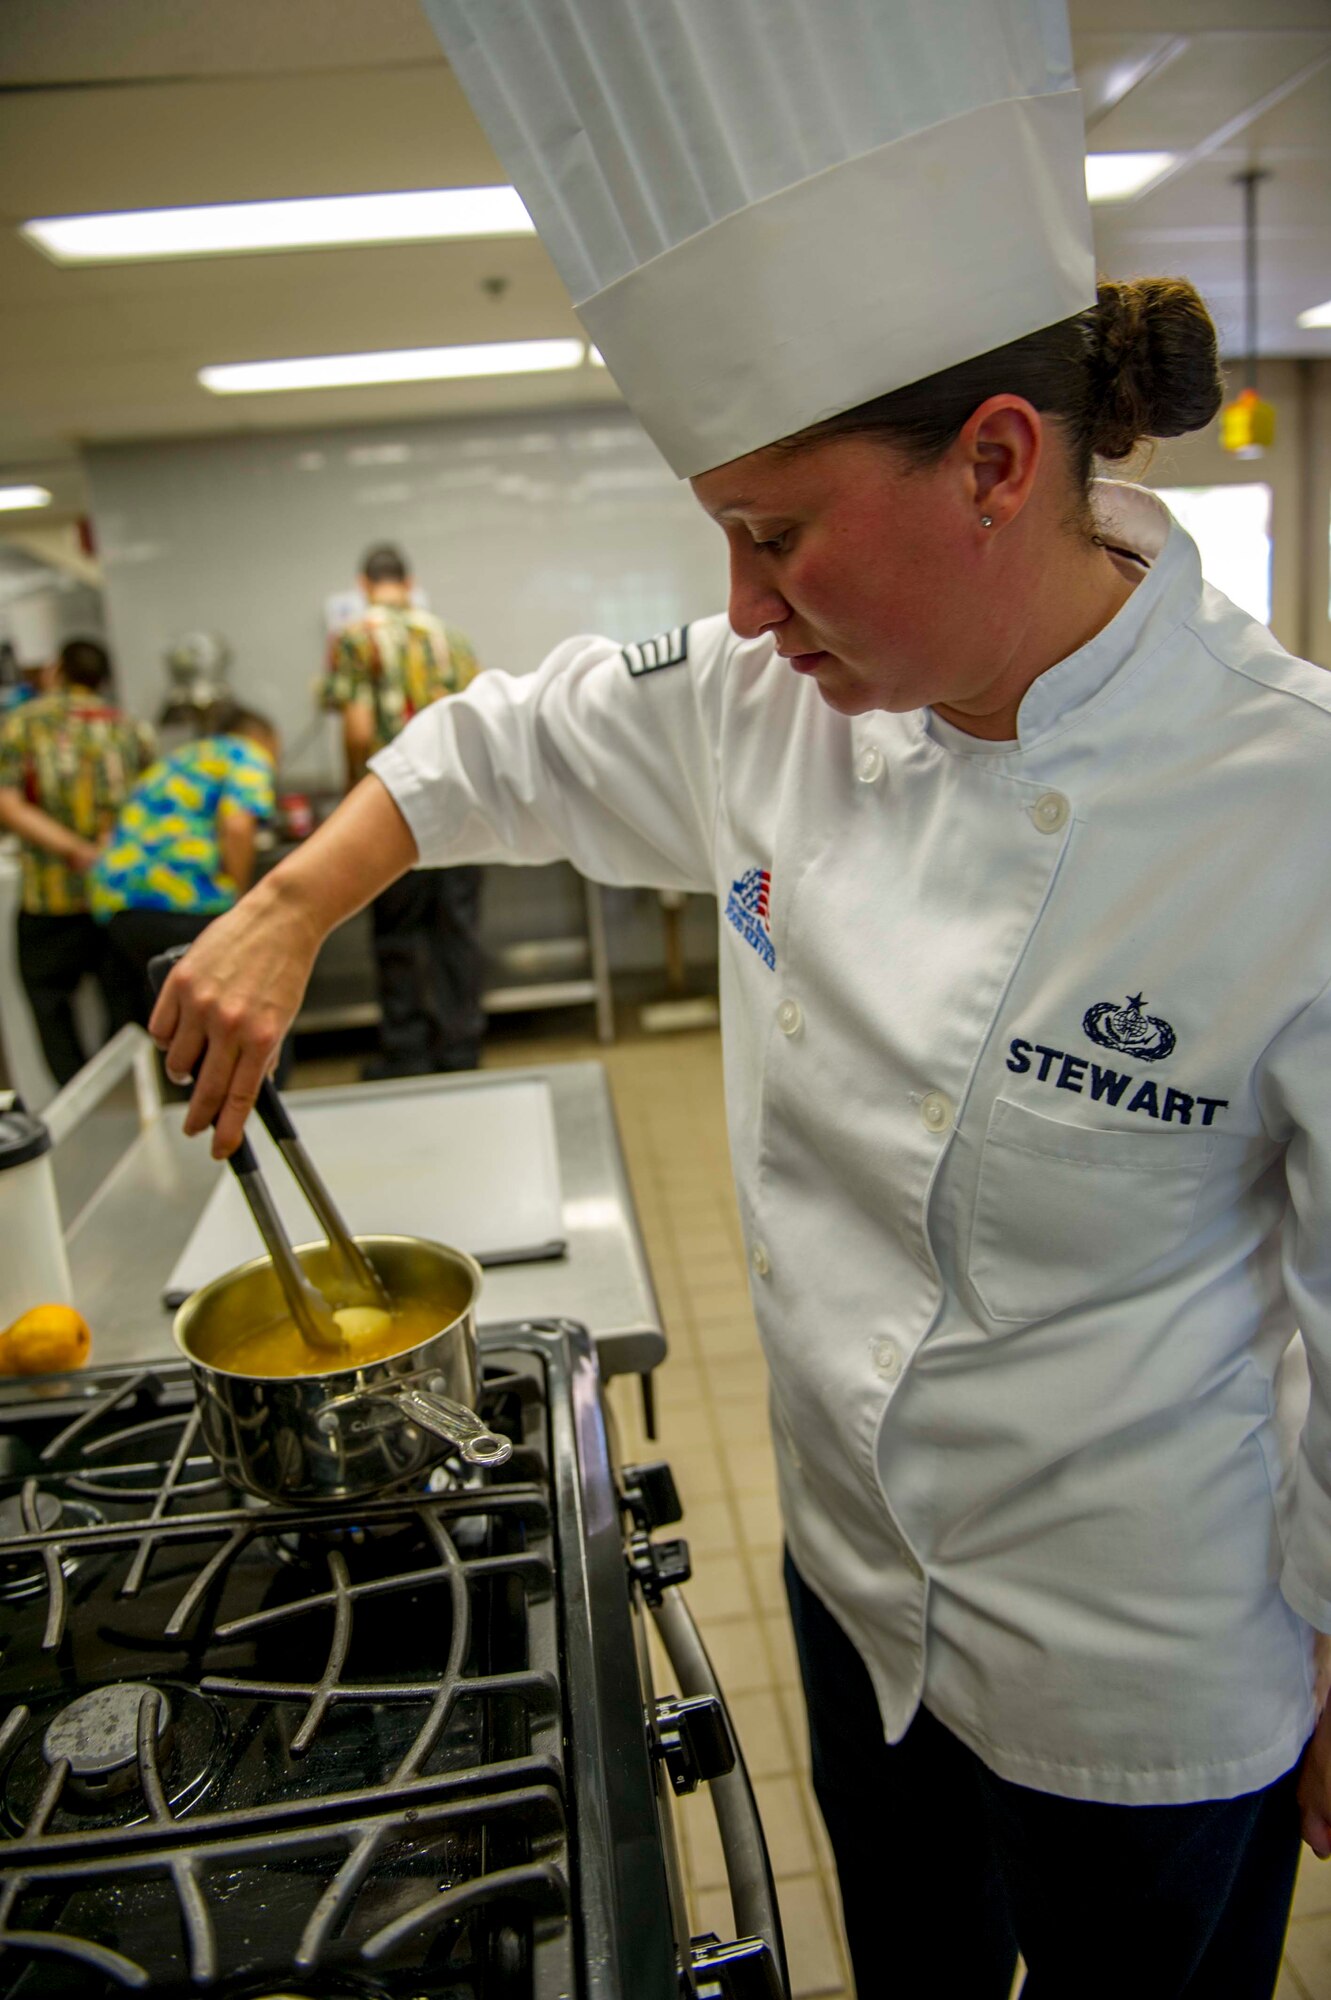 Staff Sgt. Sheryl Stewart, a 647th Force Support Squadron Airman assigned to the Joint Culinary Arts Team Hawaii, stirs a poached pear in the training kitchen at Schofield Barracks Oct. 22, 2014. Stewart will join 15 Soldiers, Sailors and Marines from around the island to face off in the annual Military Culinary Arts Competitive Training Event in Fort Lee, Va., next year. (U.S. Air Force photo by Tech. Sgt. Terri Paden)